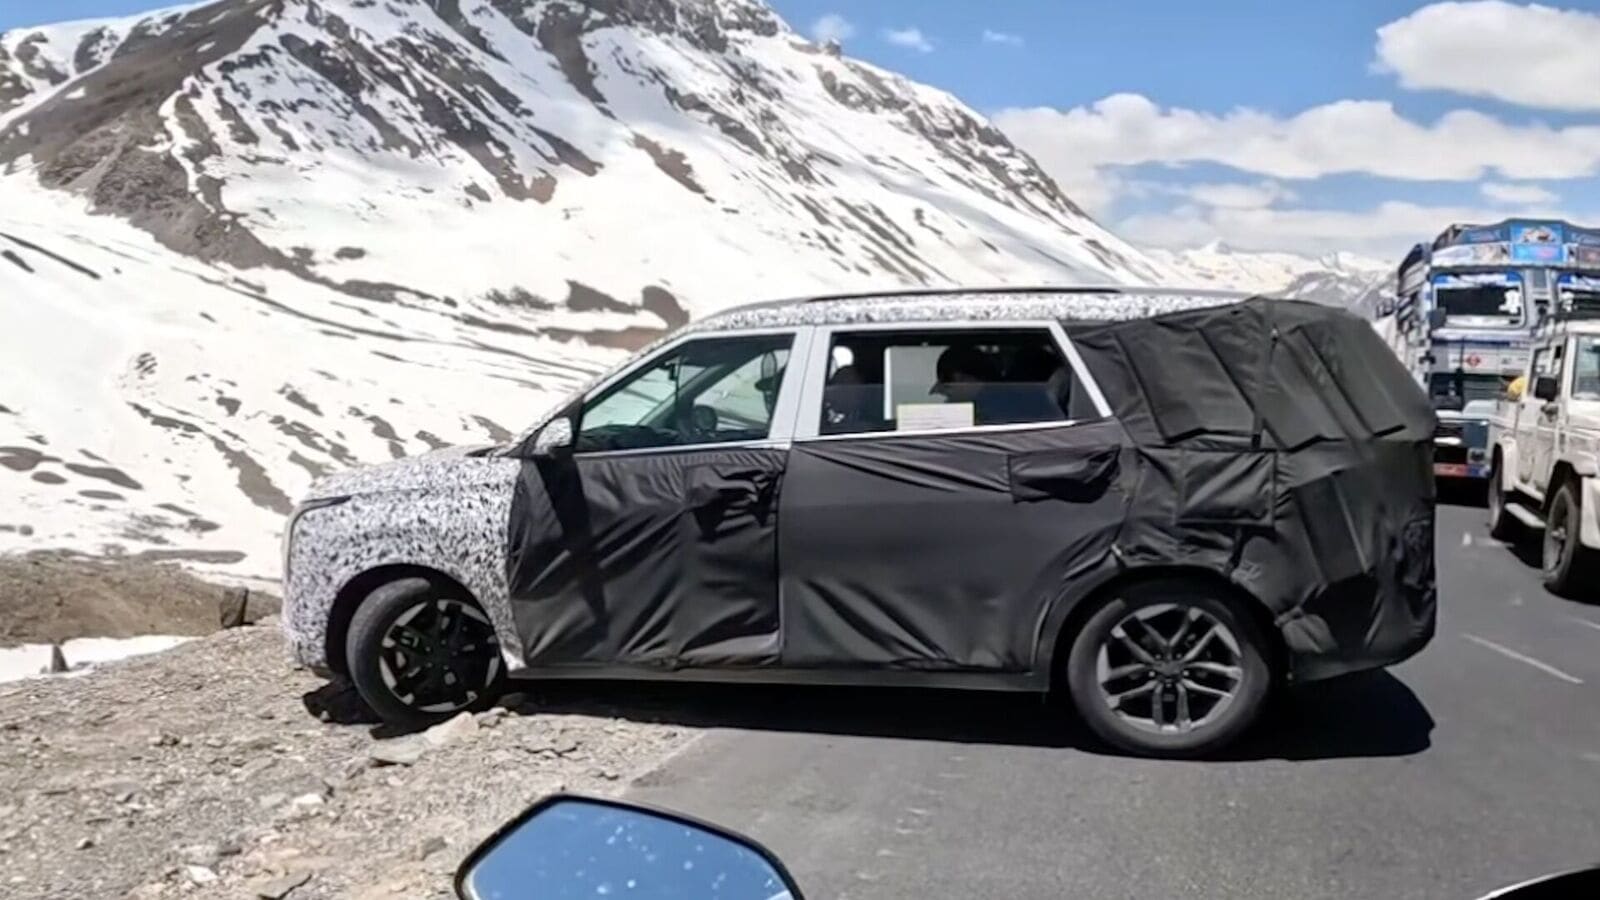 Kia Carens facelift spotted in latest spy shot near Manali. See what has changed